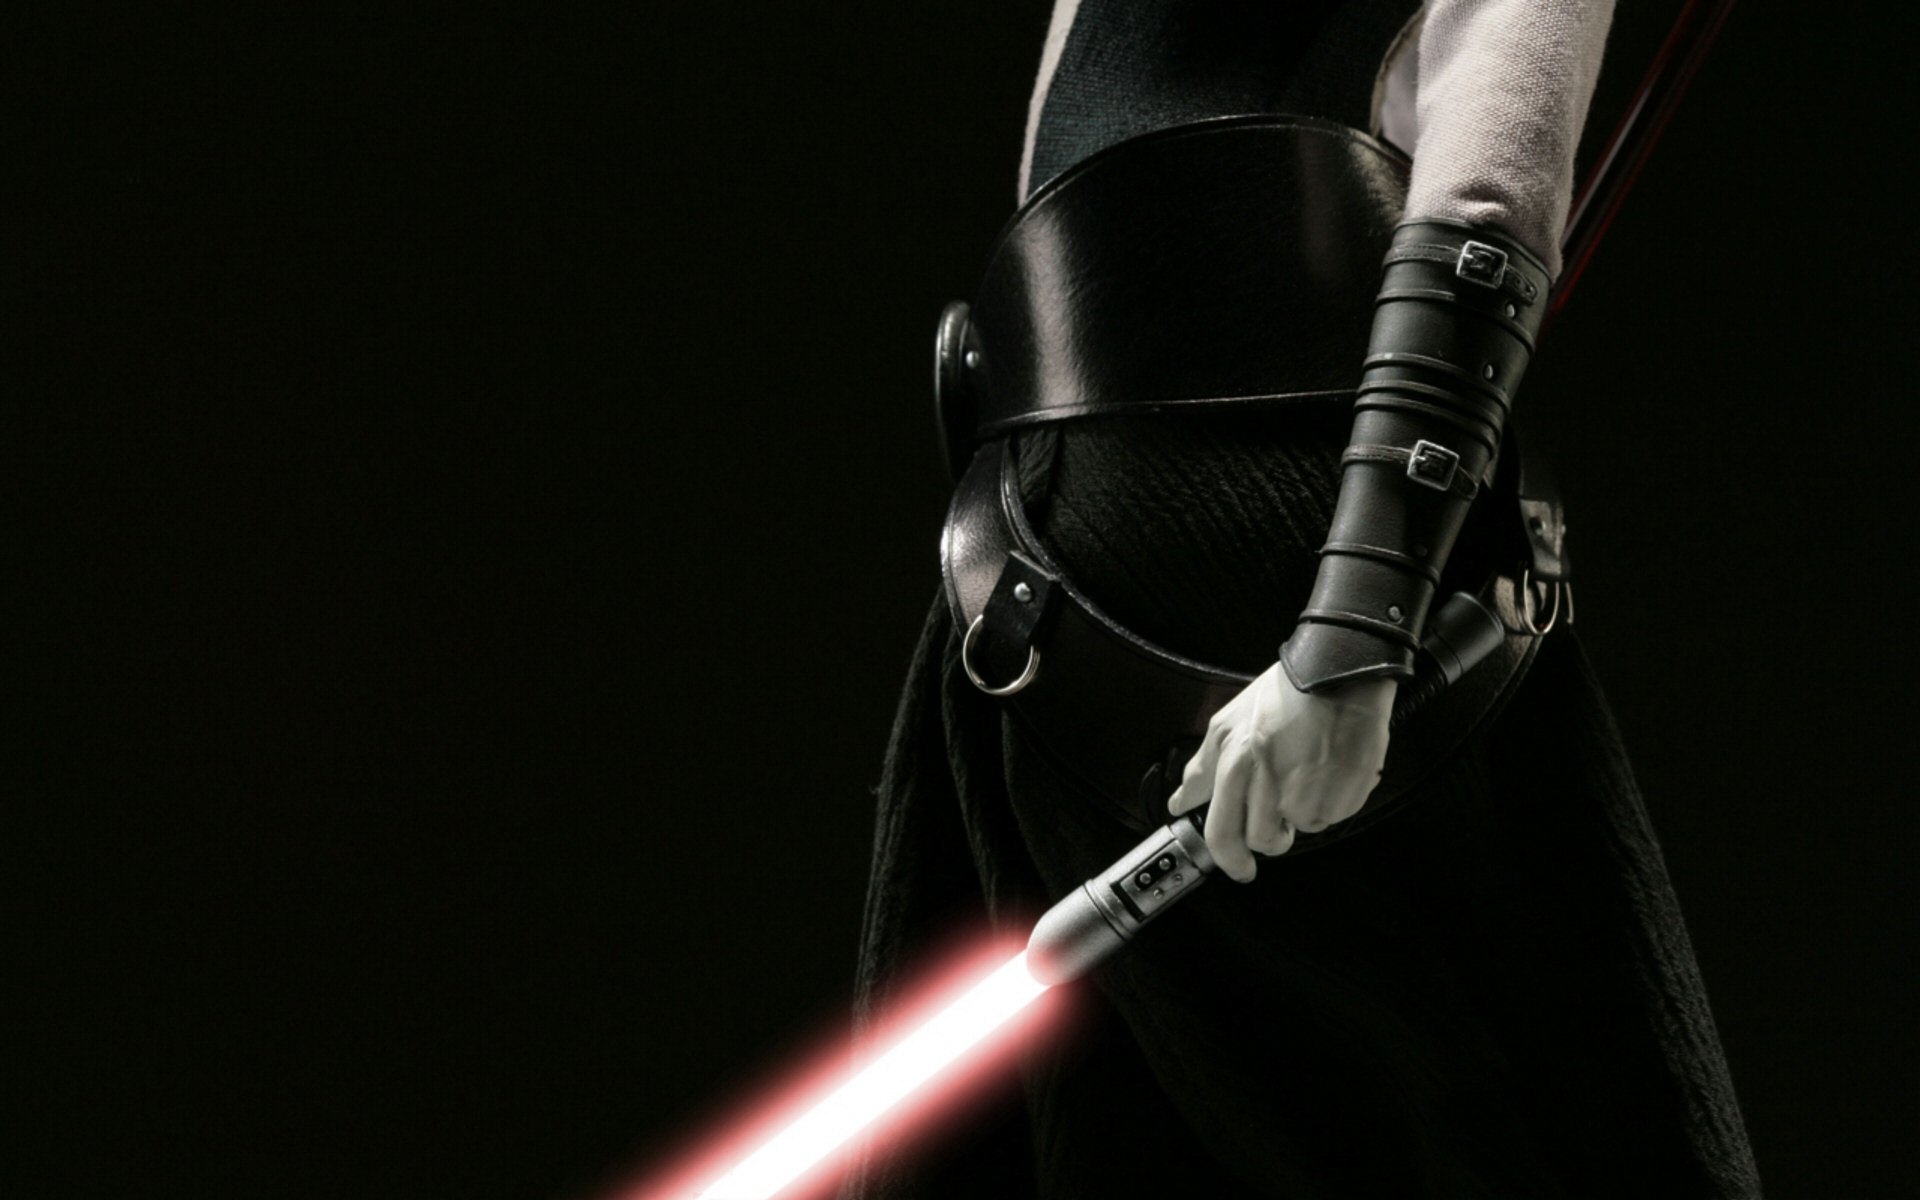 Download the Sith Lord Wallpaper Sith Lord iPhone Wallpaper Sith 1920x1200